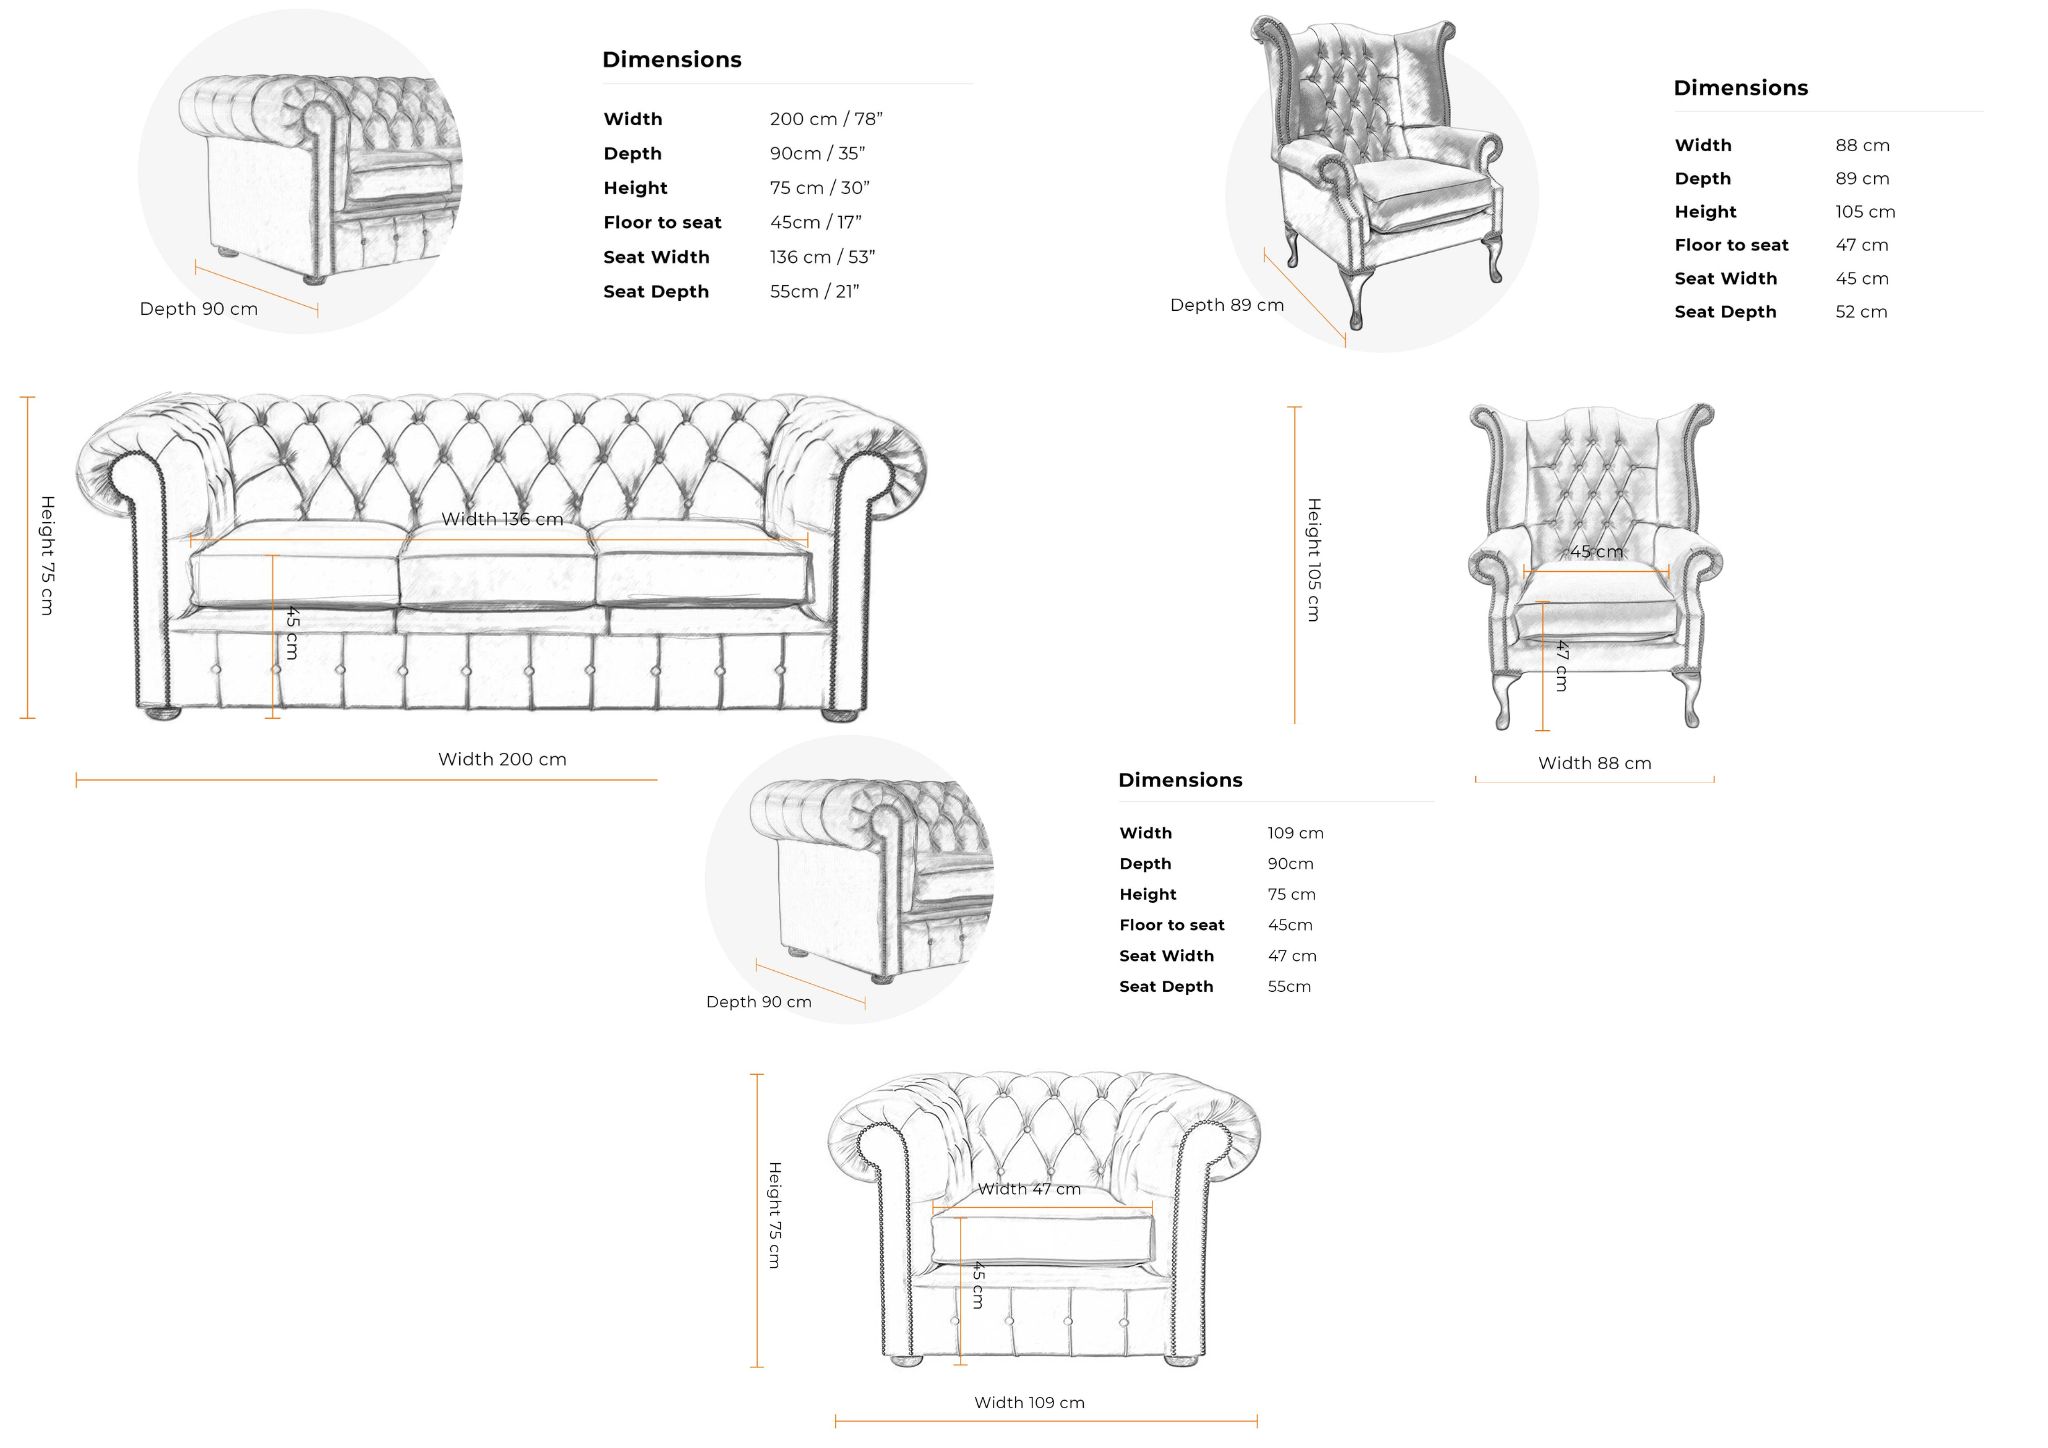 _3 Seater + 2 Seater Queen Anne High Back Suite